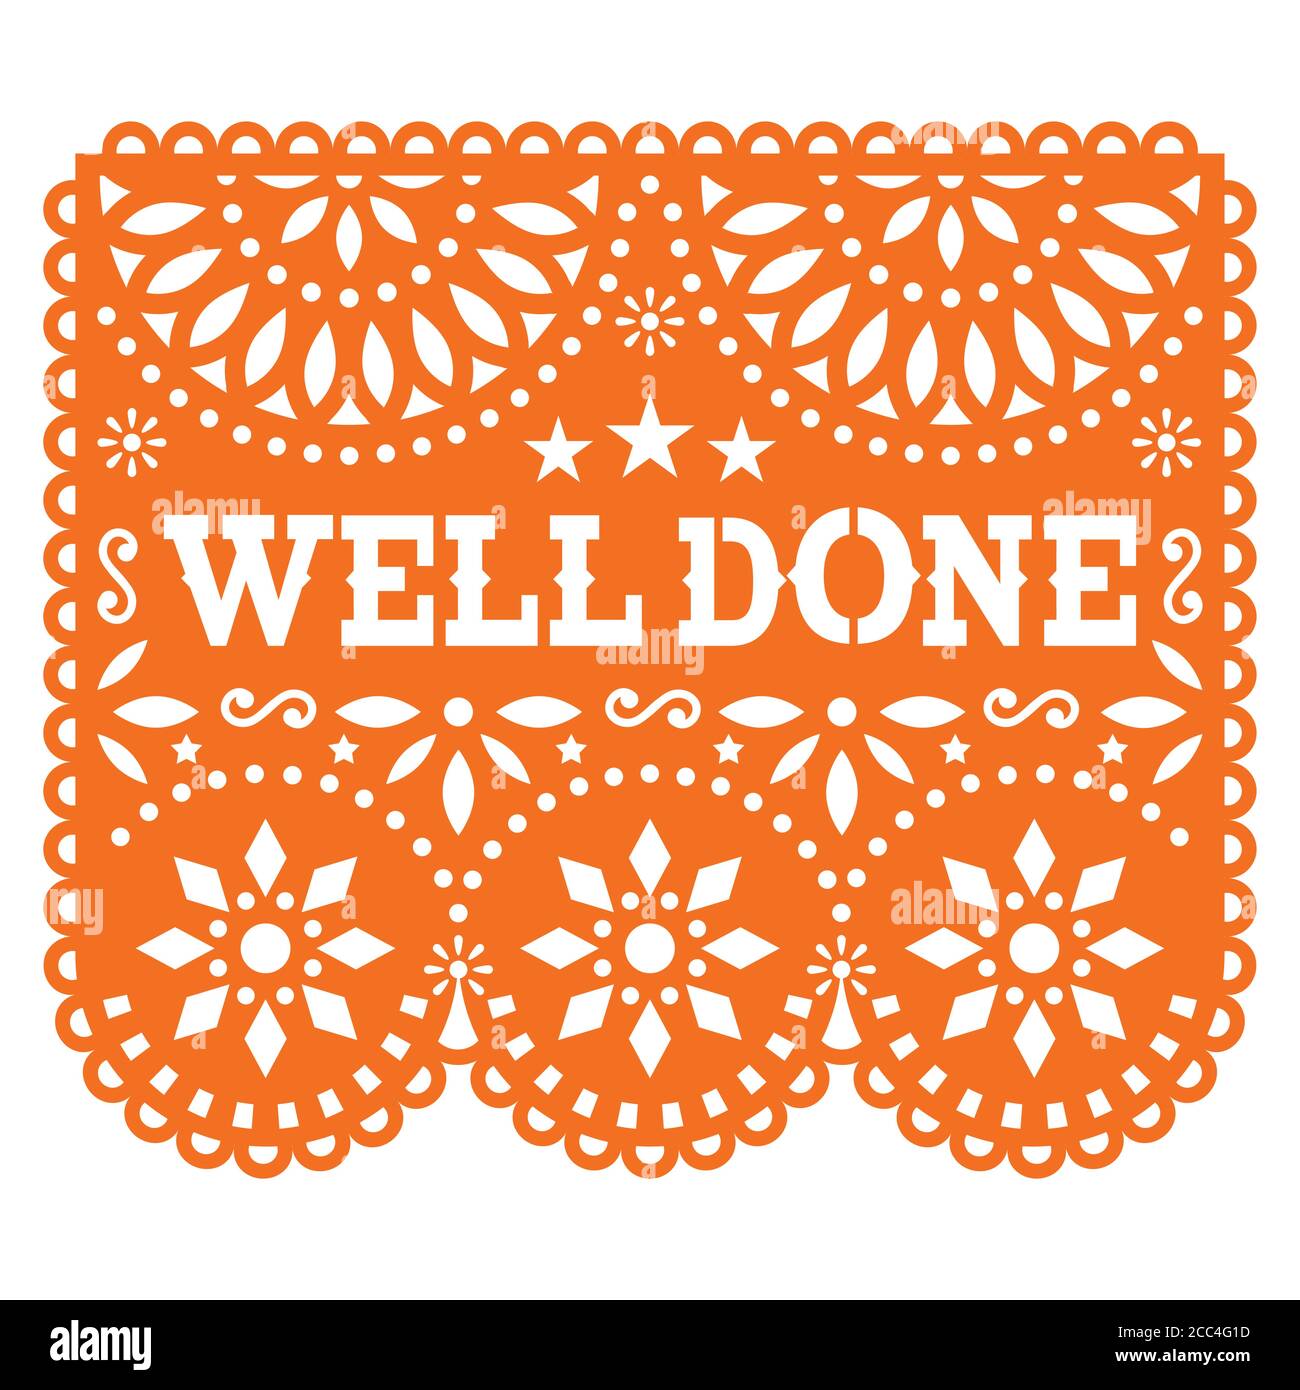 Well done greeting card vector design - Papel Picado style with flowers and geometric shapes Stock Vector